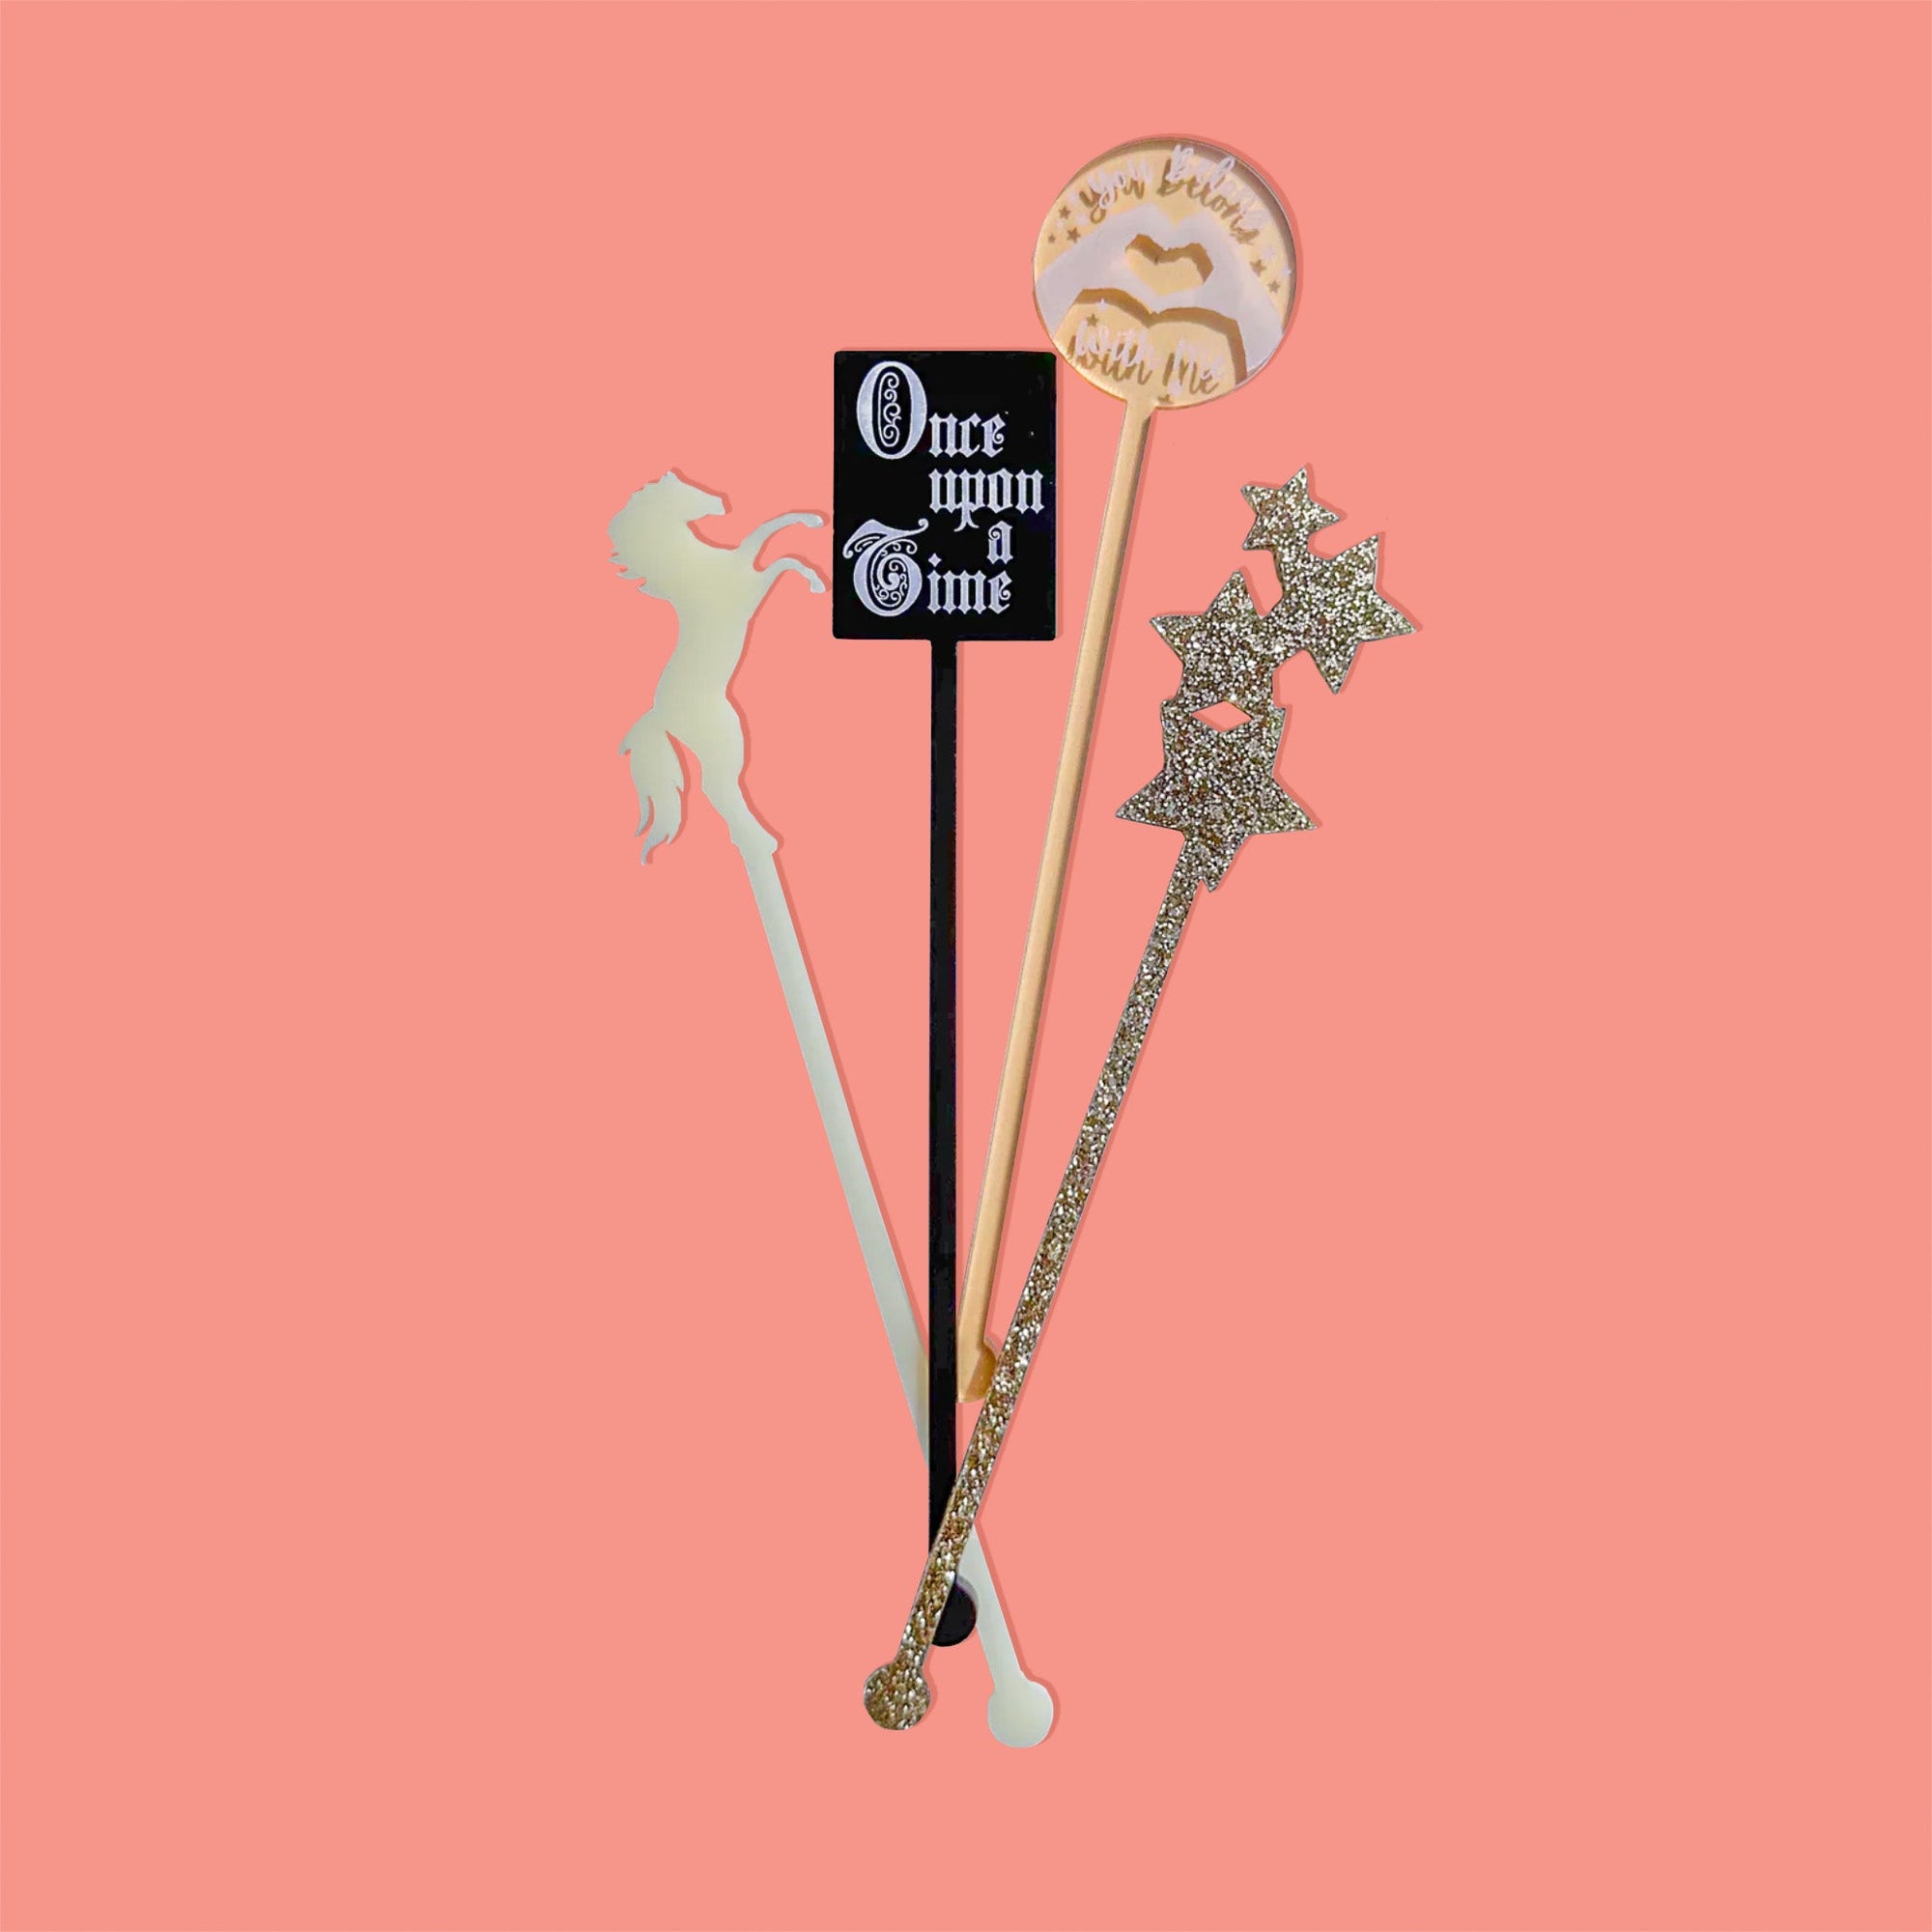 On a coral pink background sits acrylic stirrers. This Taylor Swift inspired set of 4 stirrers includes an ivory horse, gold transparent heart hands, gold glitter stars, and a black opaque "Once upon a Time" fairytale book.